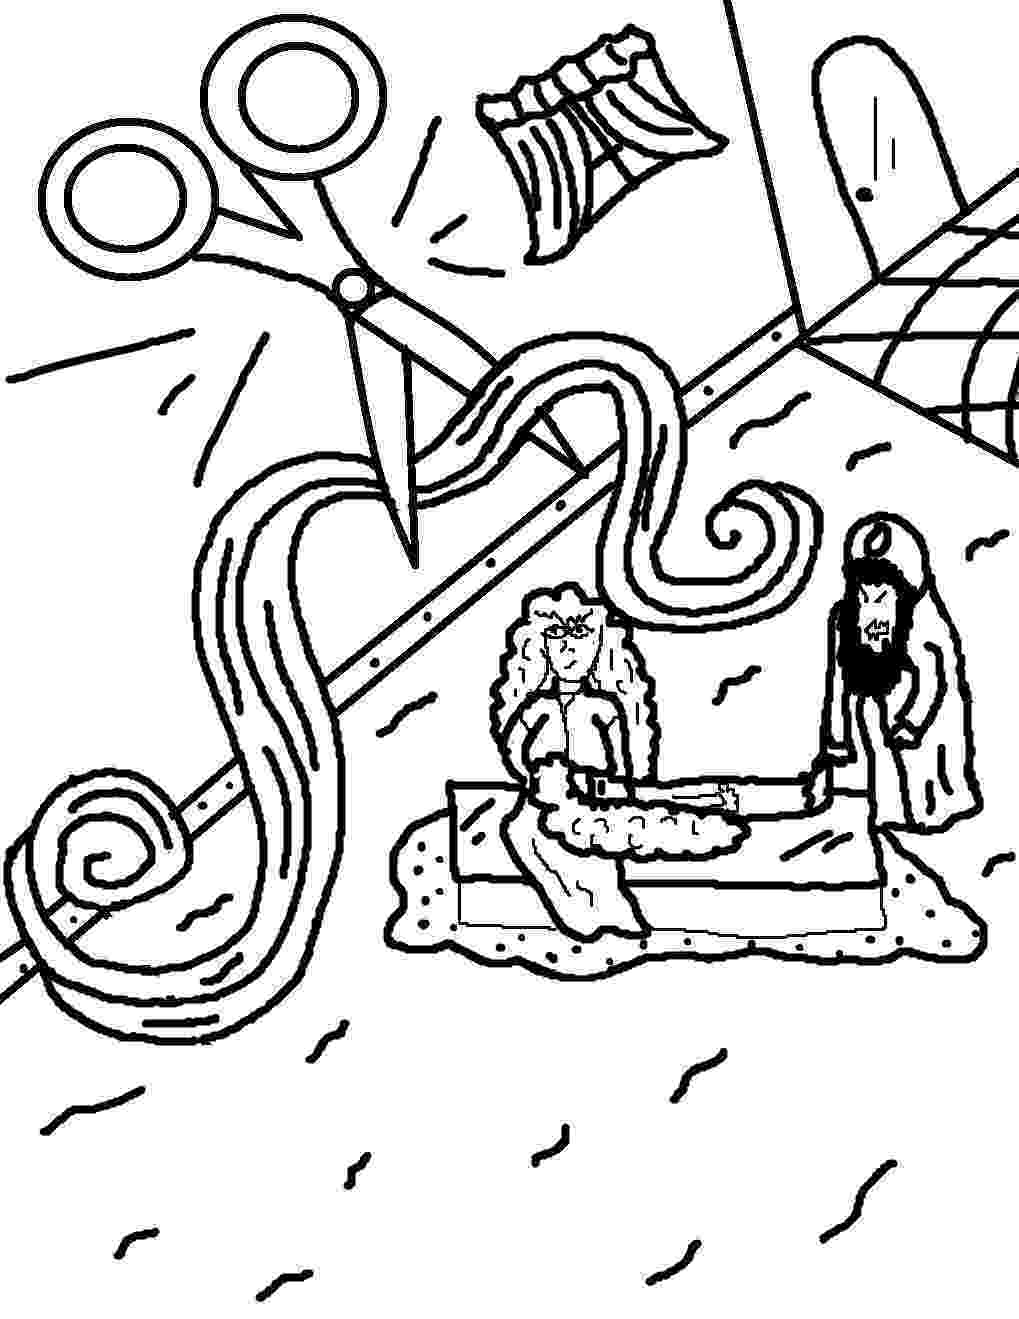 samson and delilah coloring pages samson and delilah coloring pages collection coloring and coloring pages samson delilah 